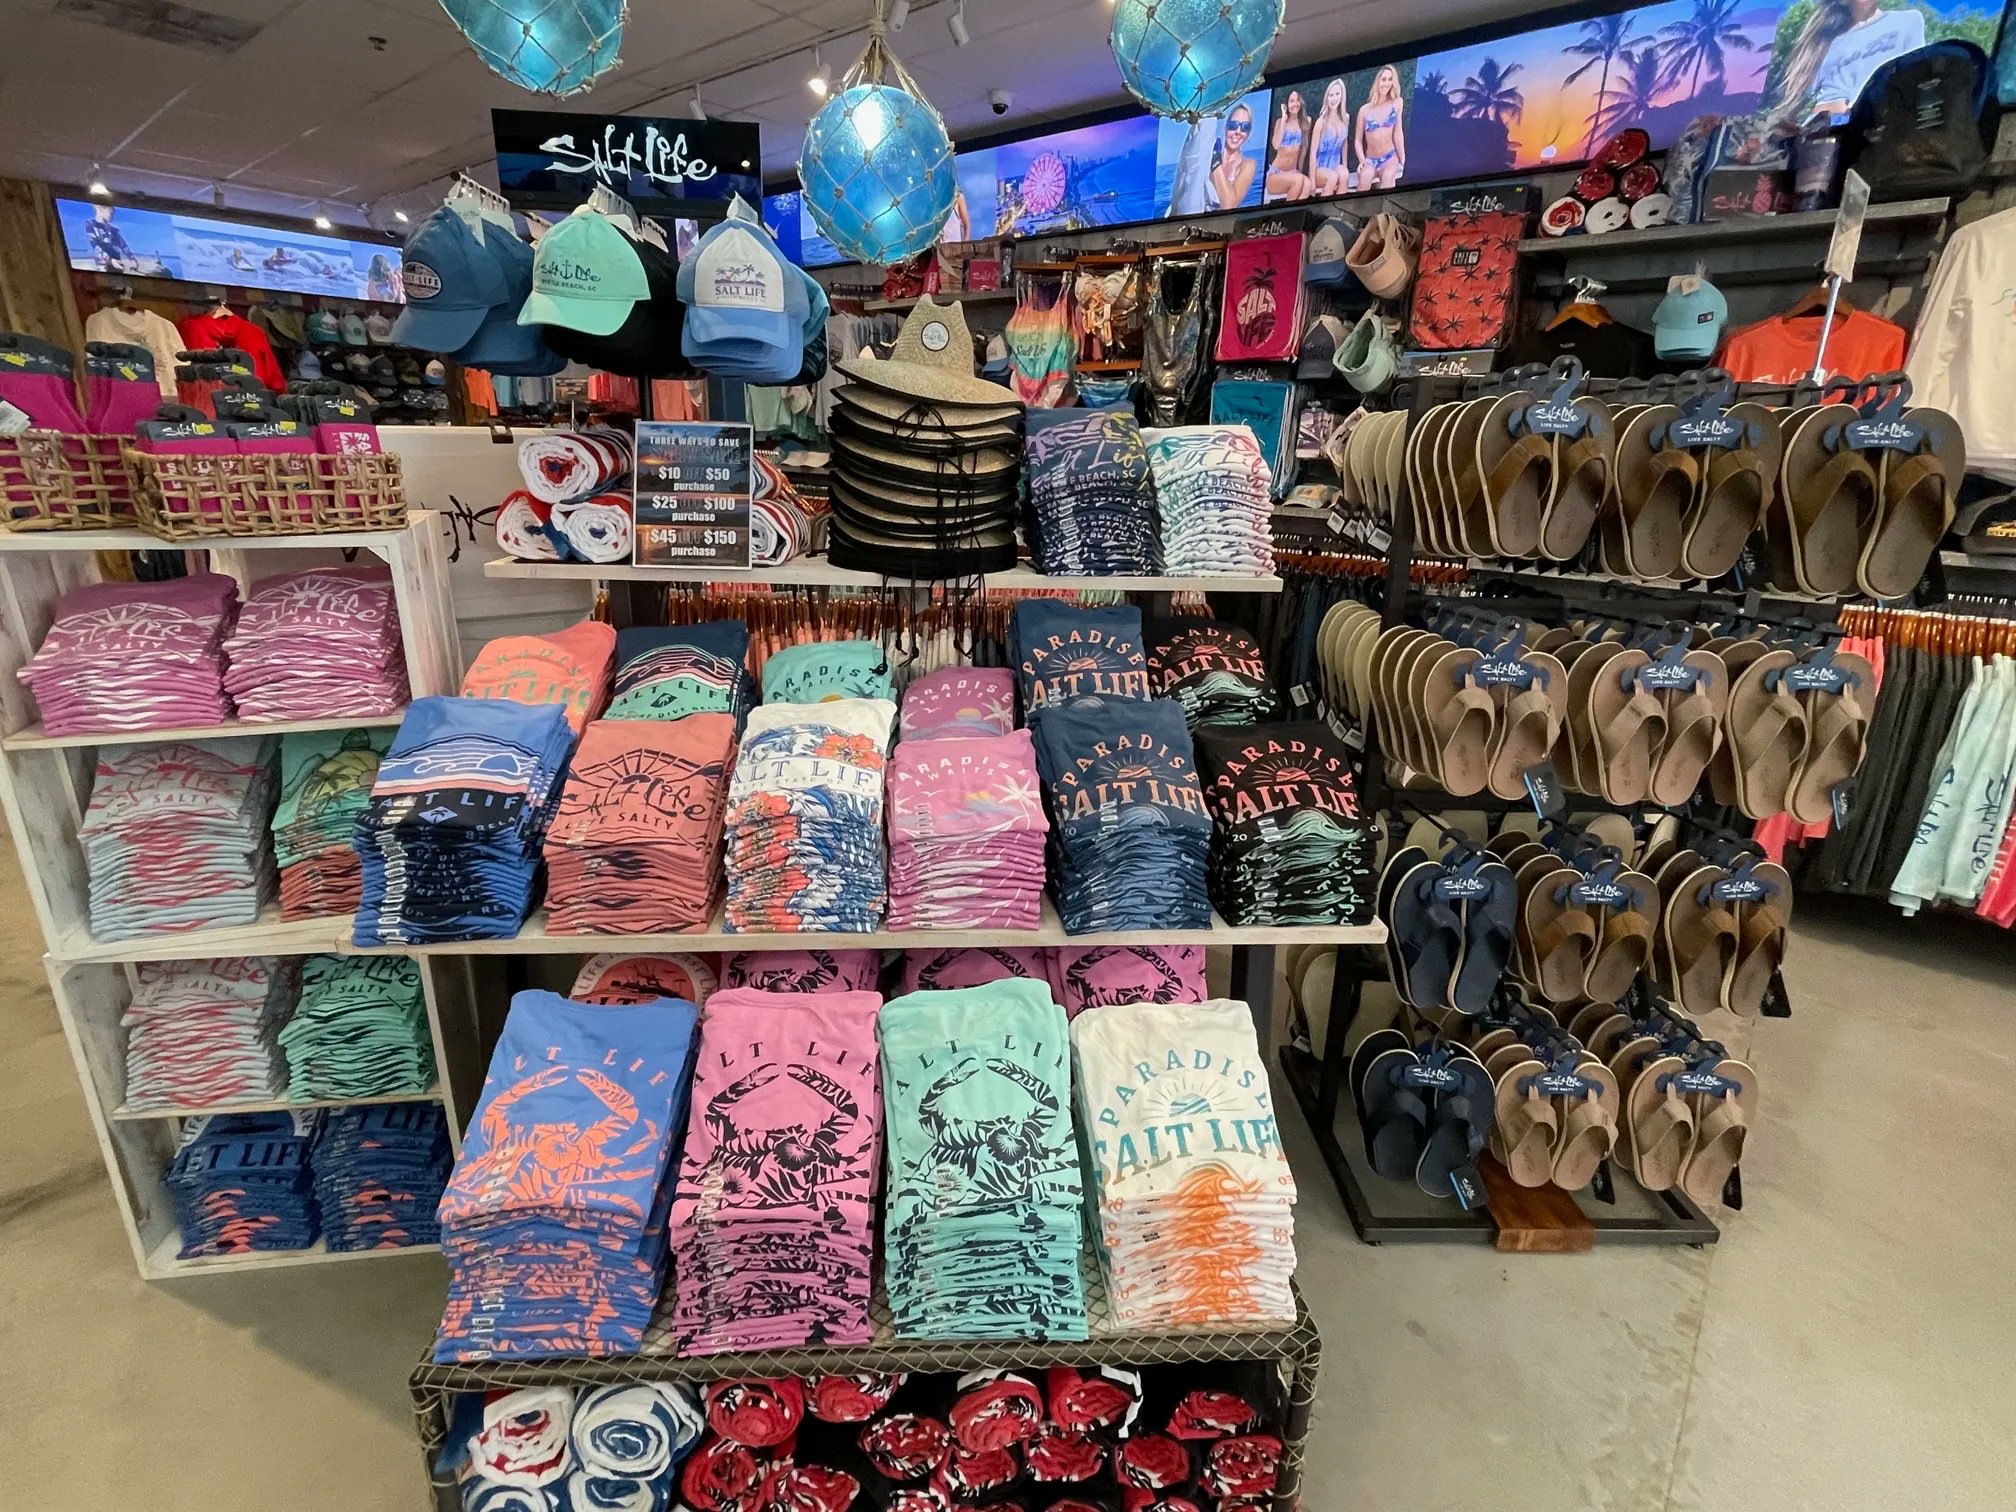 Salt Life on X: It's never too early to plan your next beach trip! 🏖️  Stop by one of our Salt Life Retail Stores and stock up. 🎣 🏄‍♀️ Find a  store